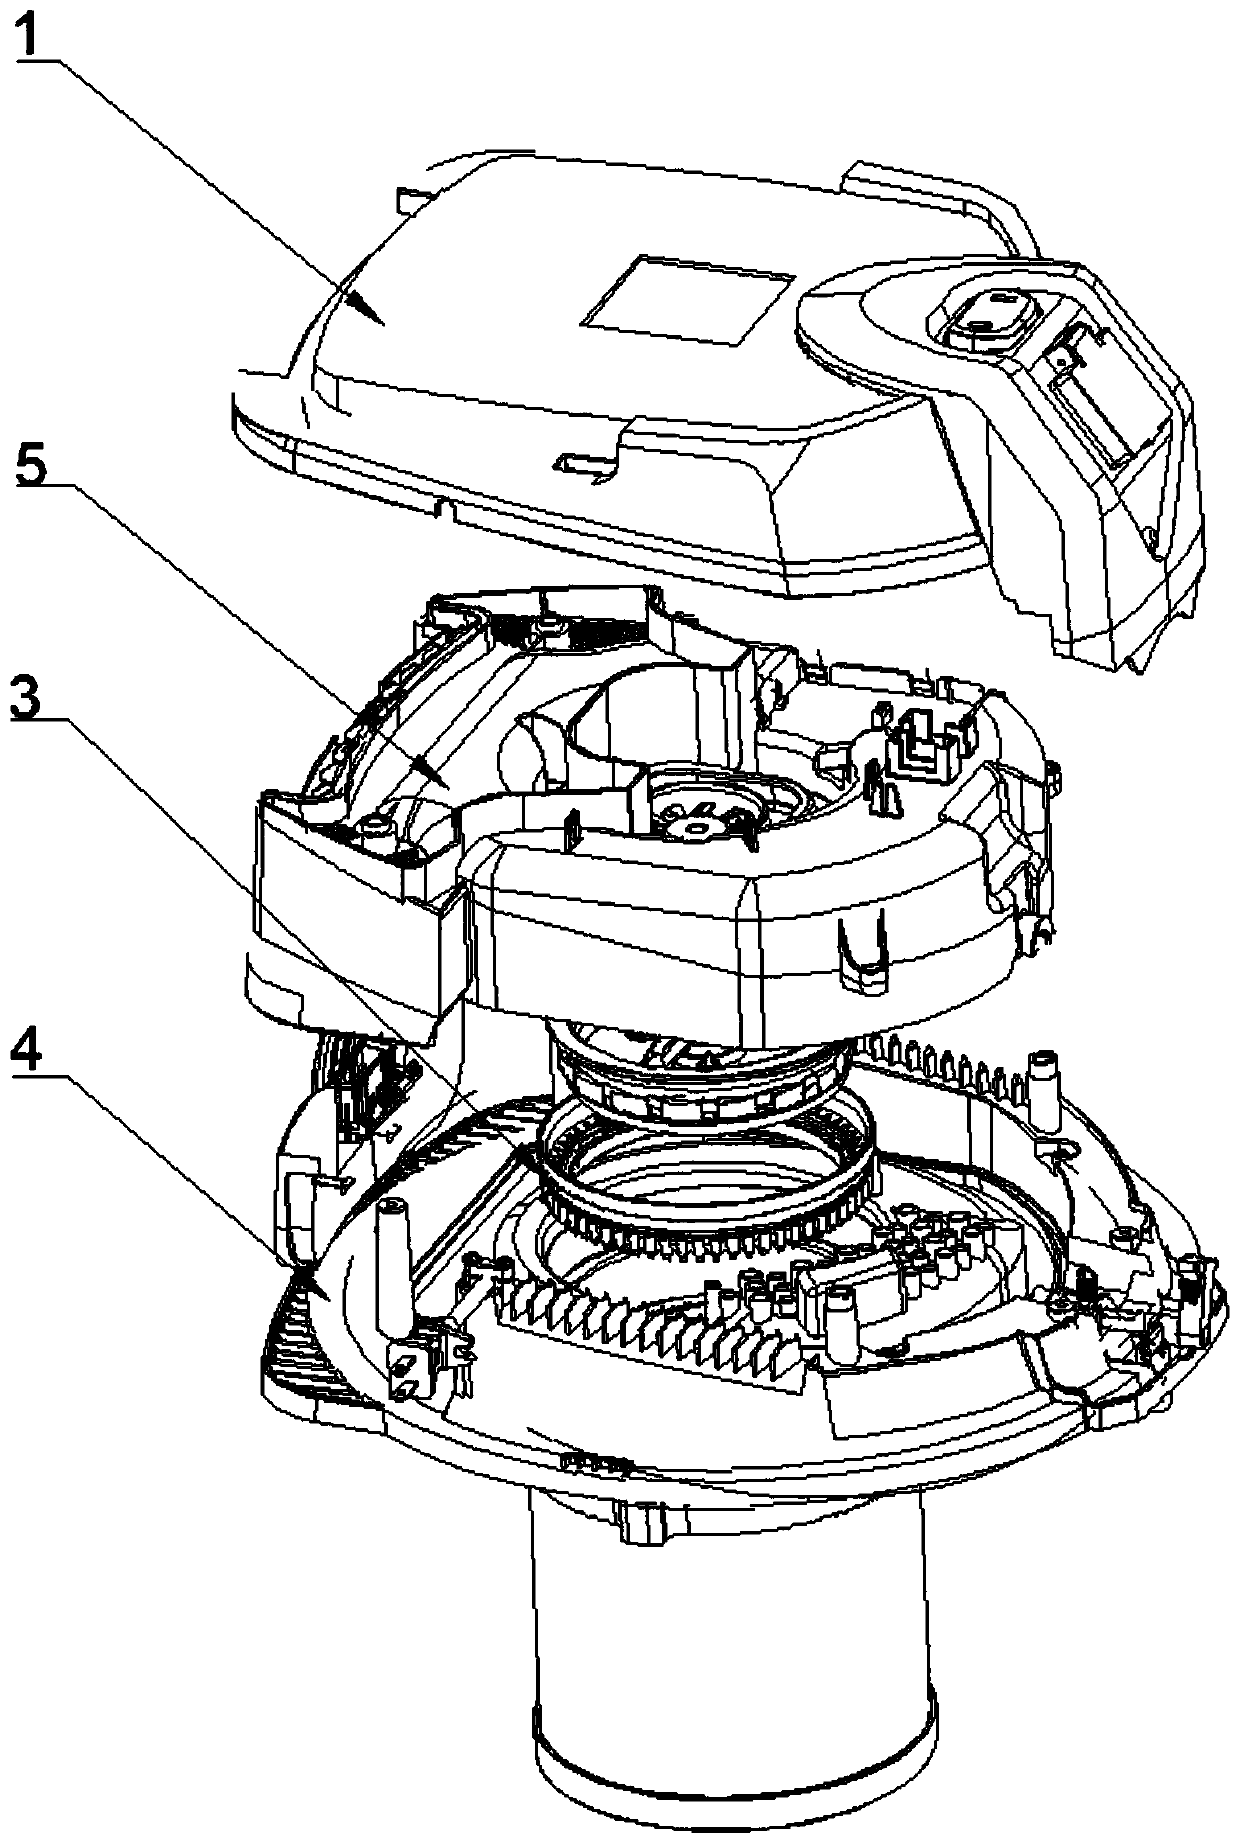 Enclosed installation mechanism for motors in small and medium electrical appliances